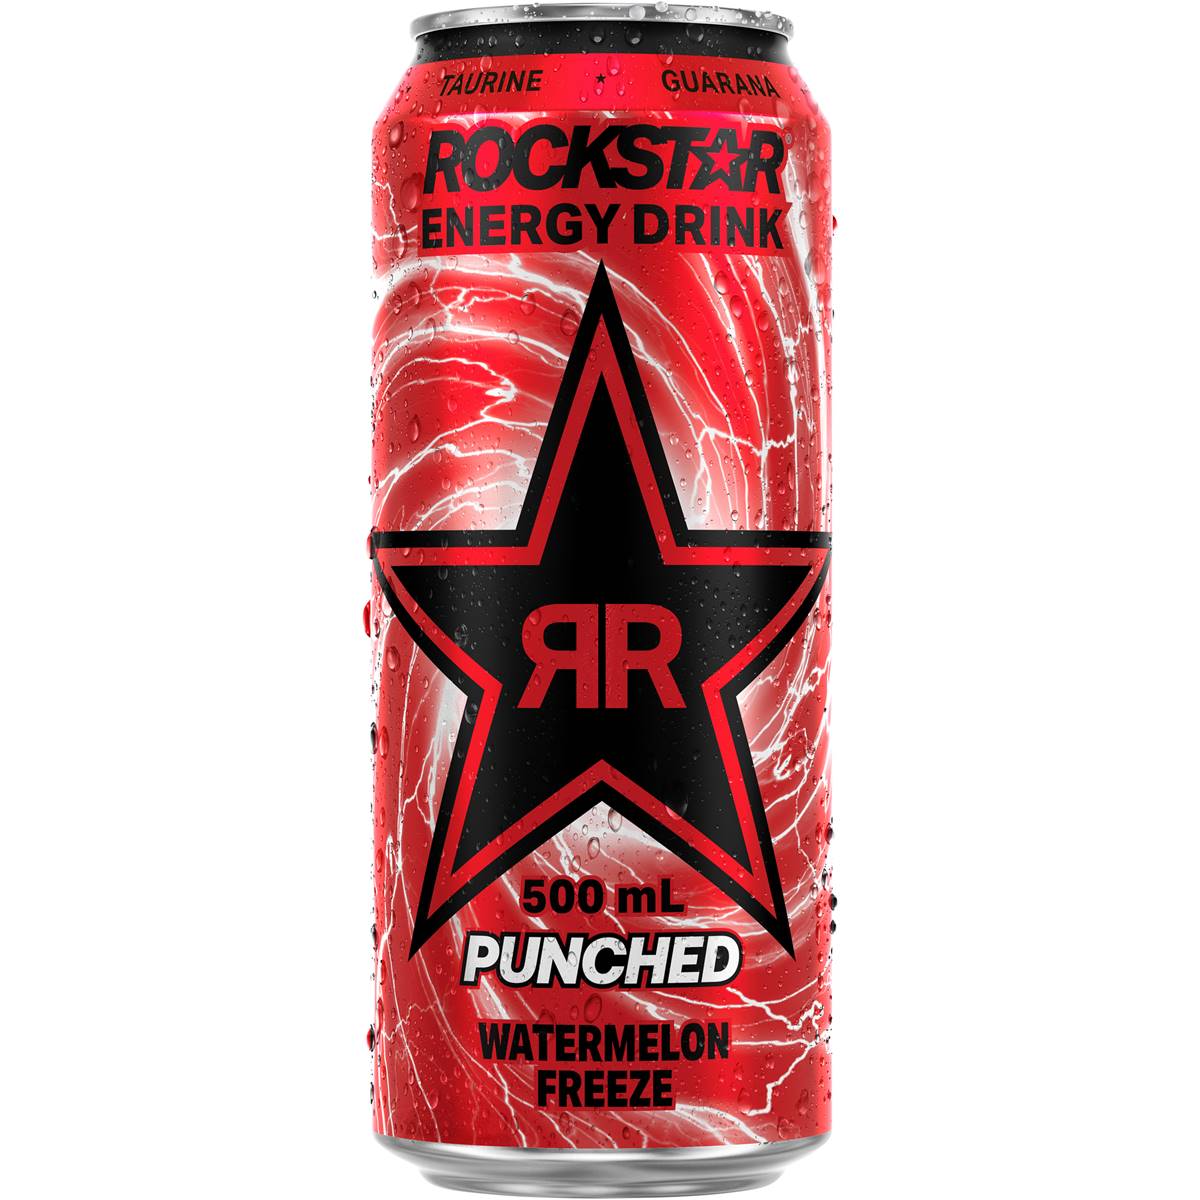 Calories in Rockstar Energy Drink Punched Watermelon Freeze